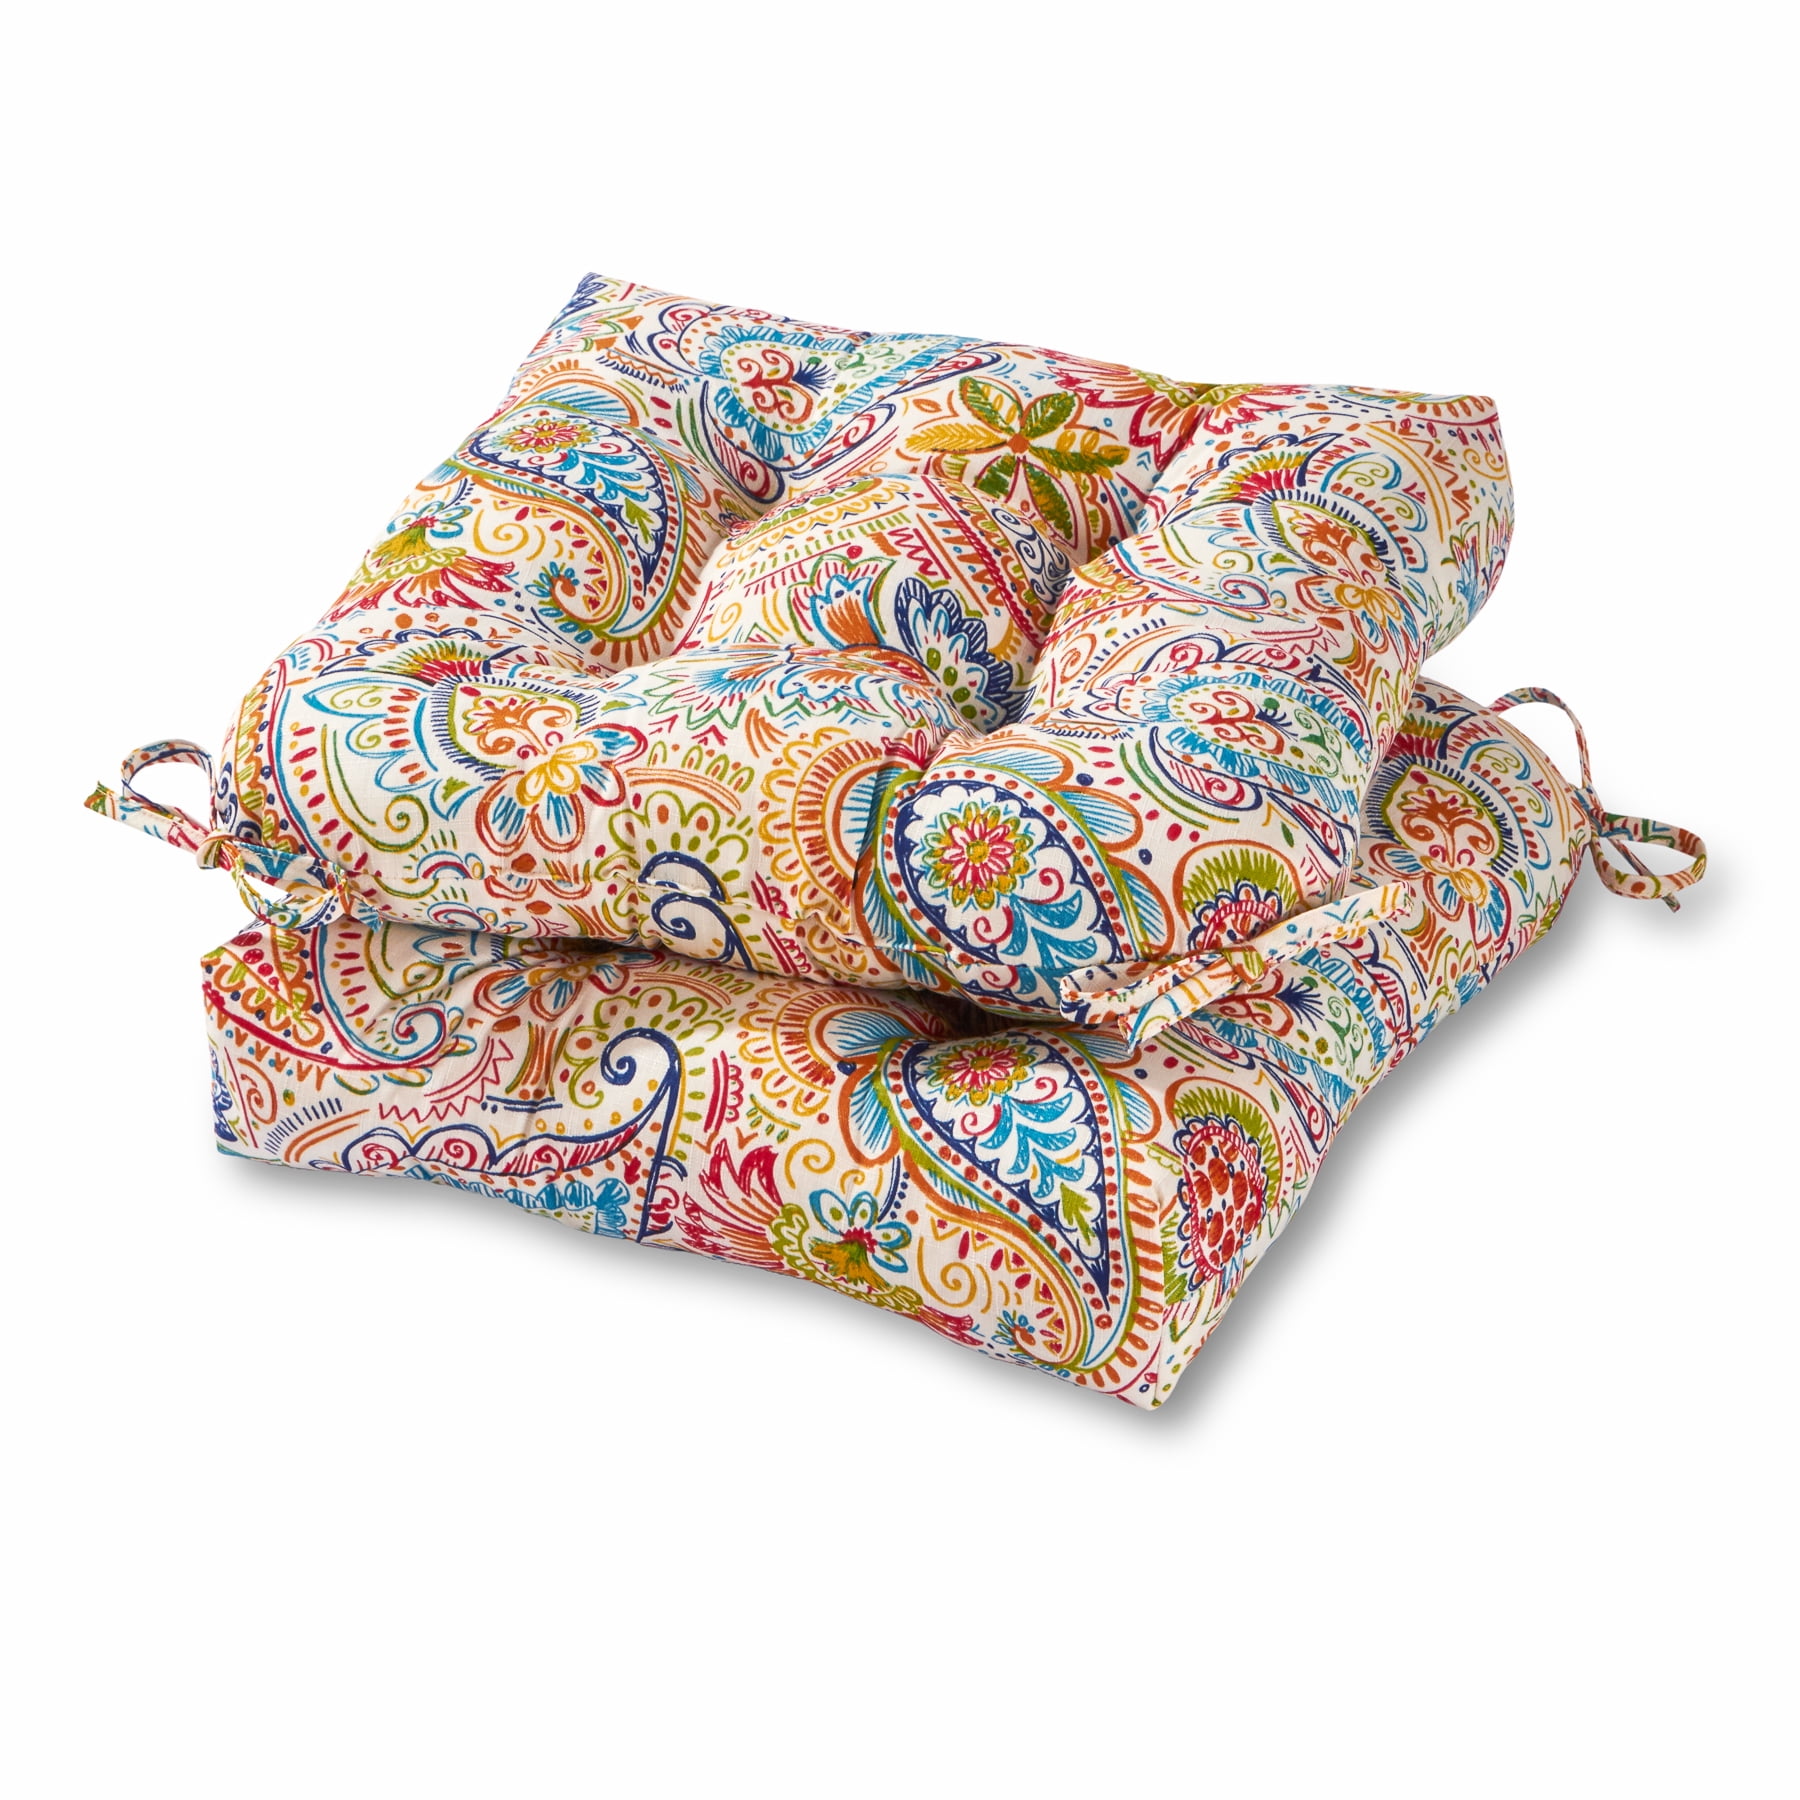 Painted Paisley 20 in. Plush Outdoor Chair Cushion, Set of 2 - Walmart